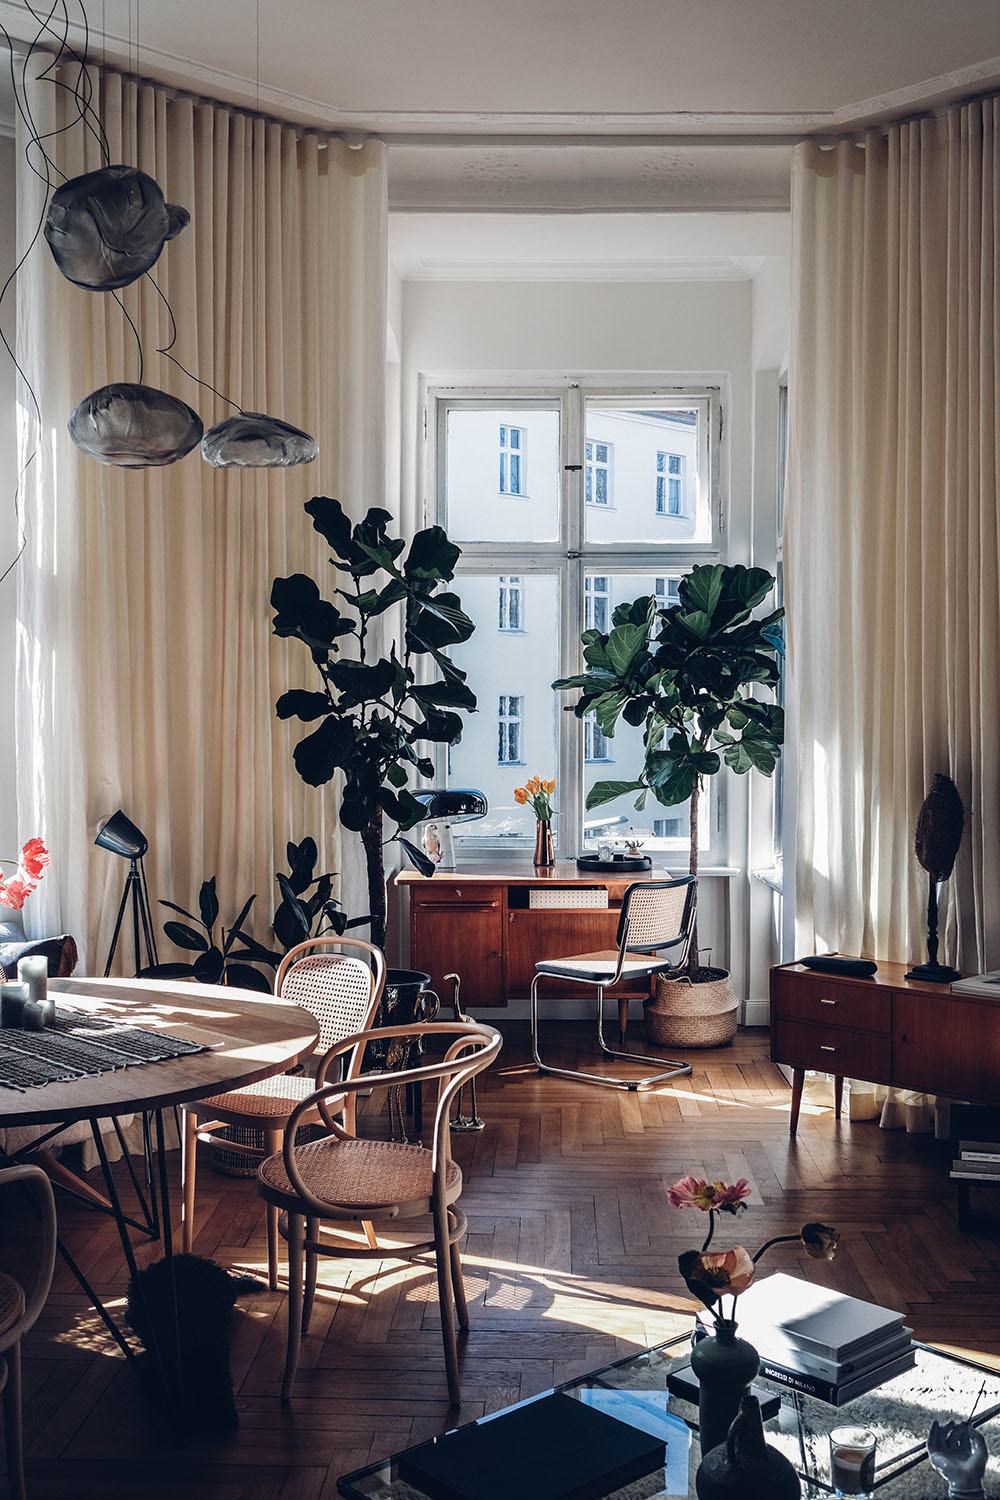 Home Tour with Tim Labenda & Hannes Krause in Berlin